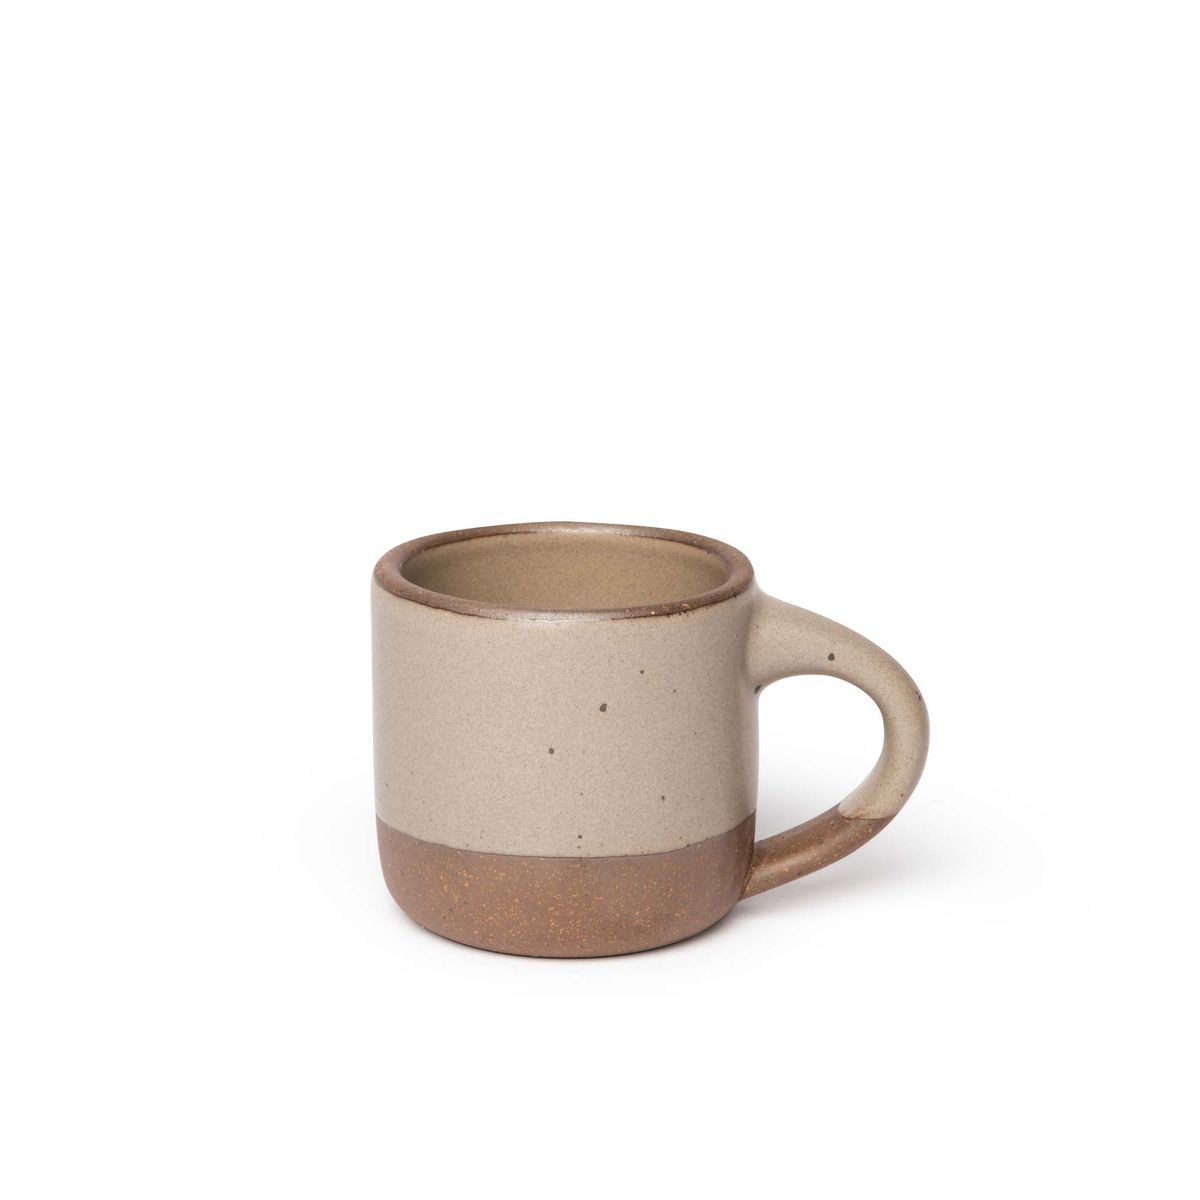 A small sized ceramic mug with handle in a warm pale brown glaze featuring iron speckles and unglazed rim and bottom base.